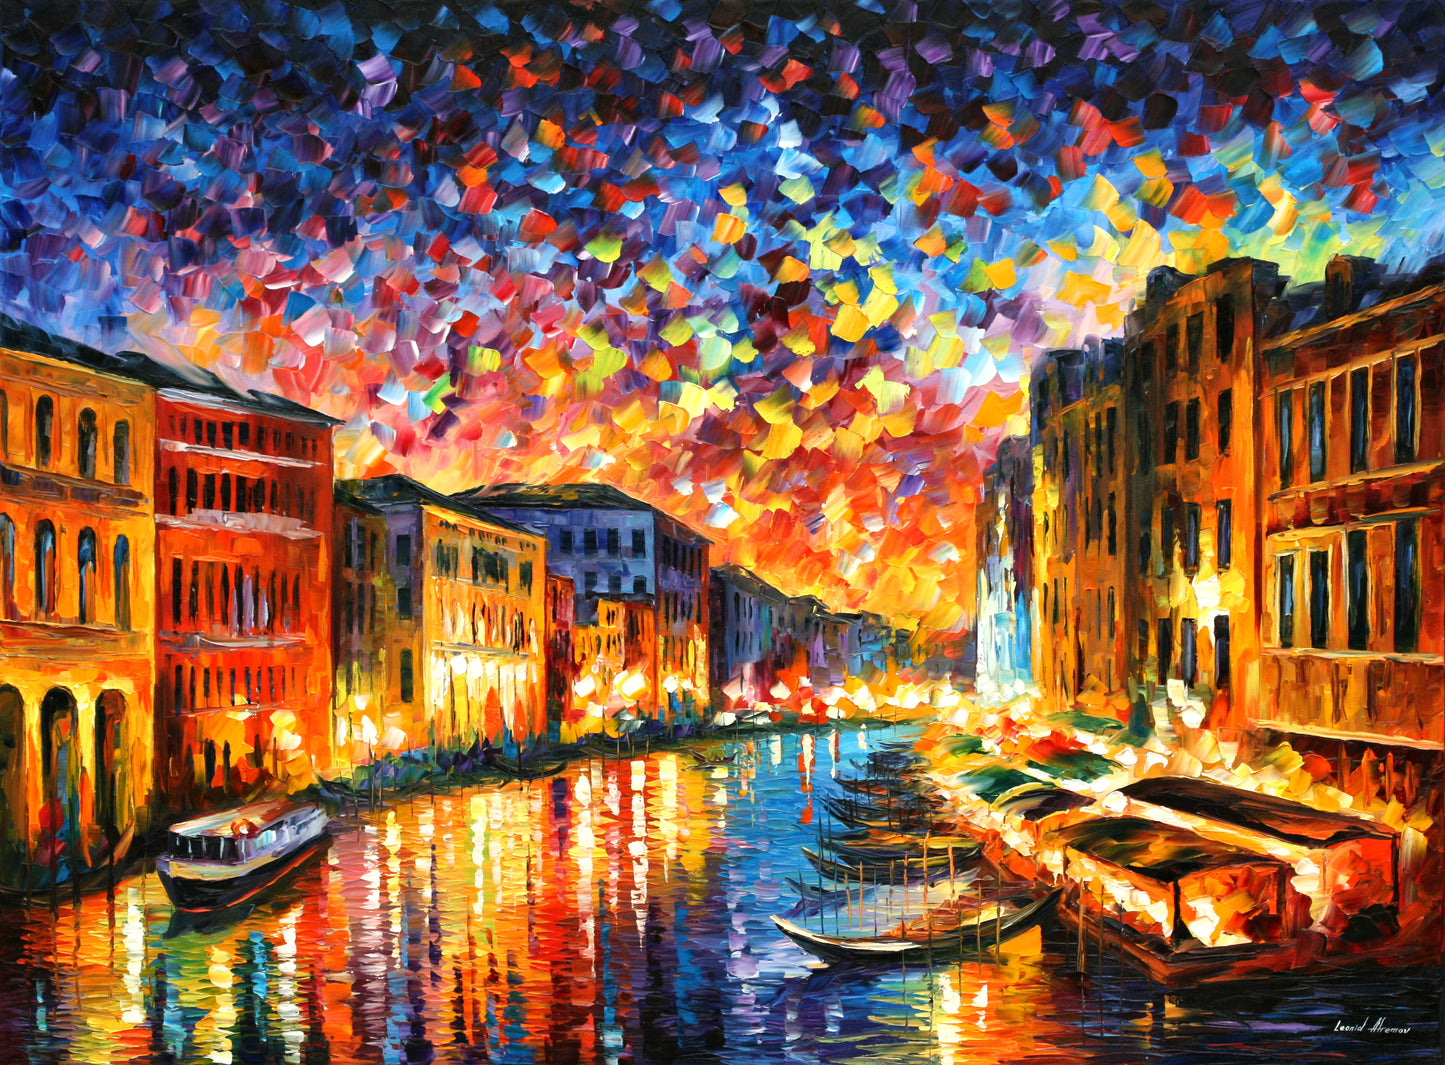 VENICE - GRAND CANAL - Afremov - Paint By Numbers Kit